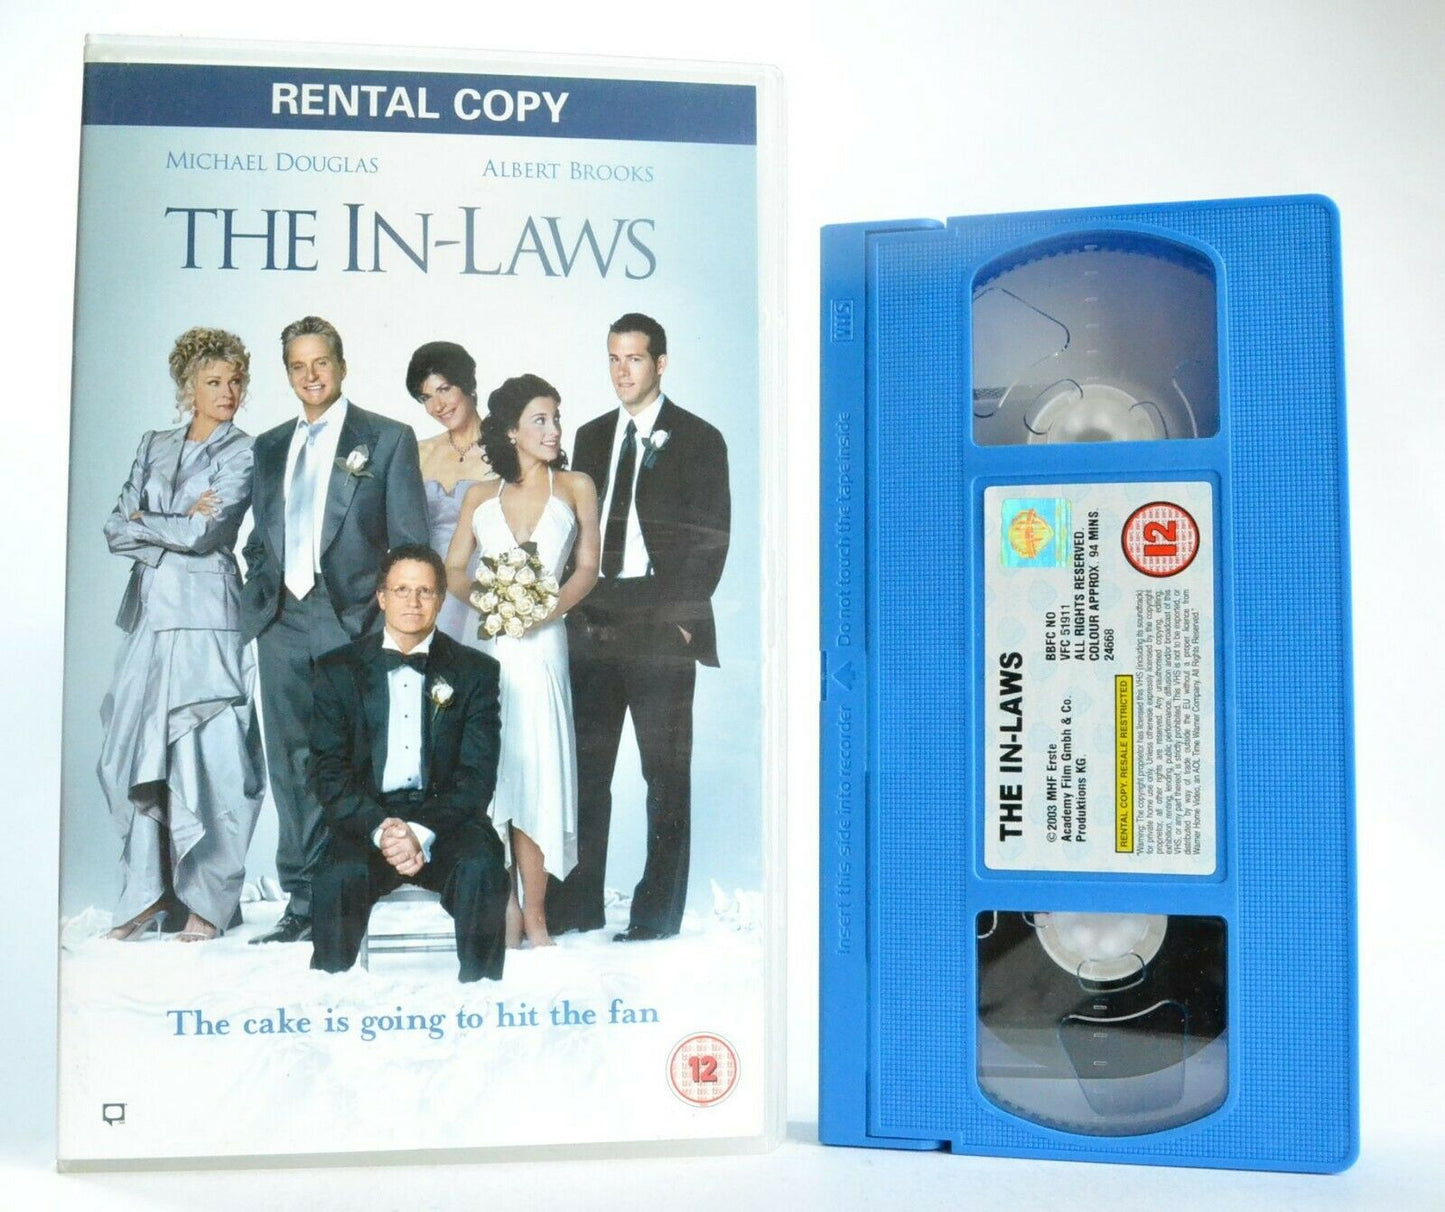 The In-Laws (2003): Wedding Comedy - Large Box - M.Douglas/R.Reynolds - Pal VHS-